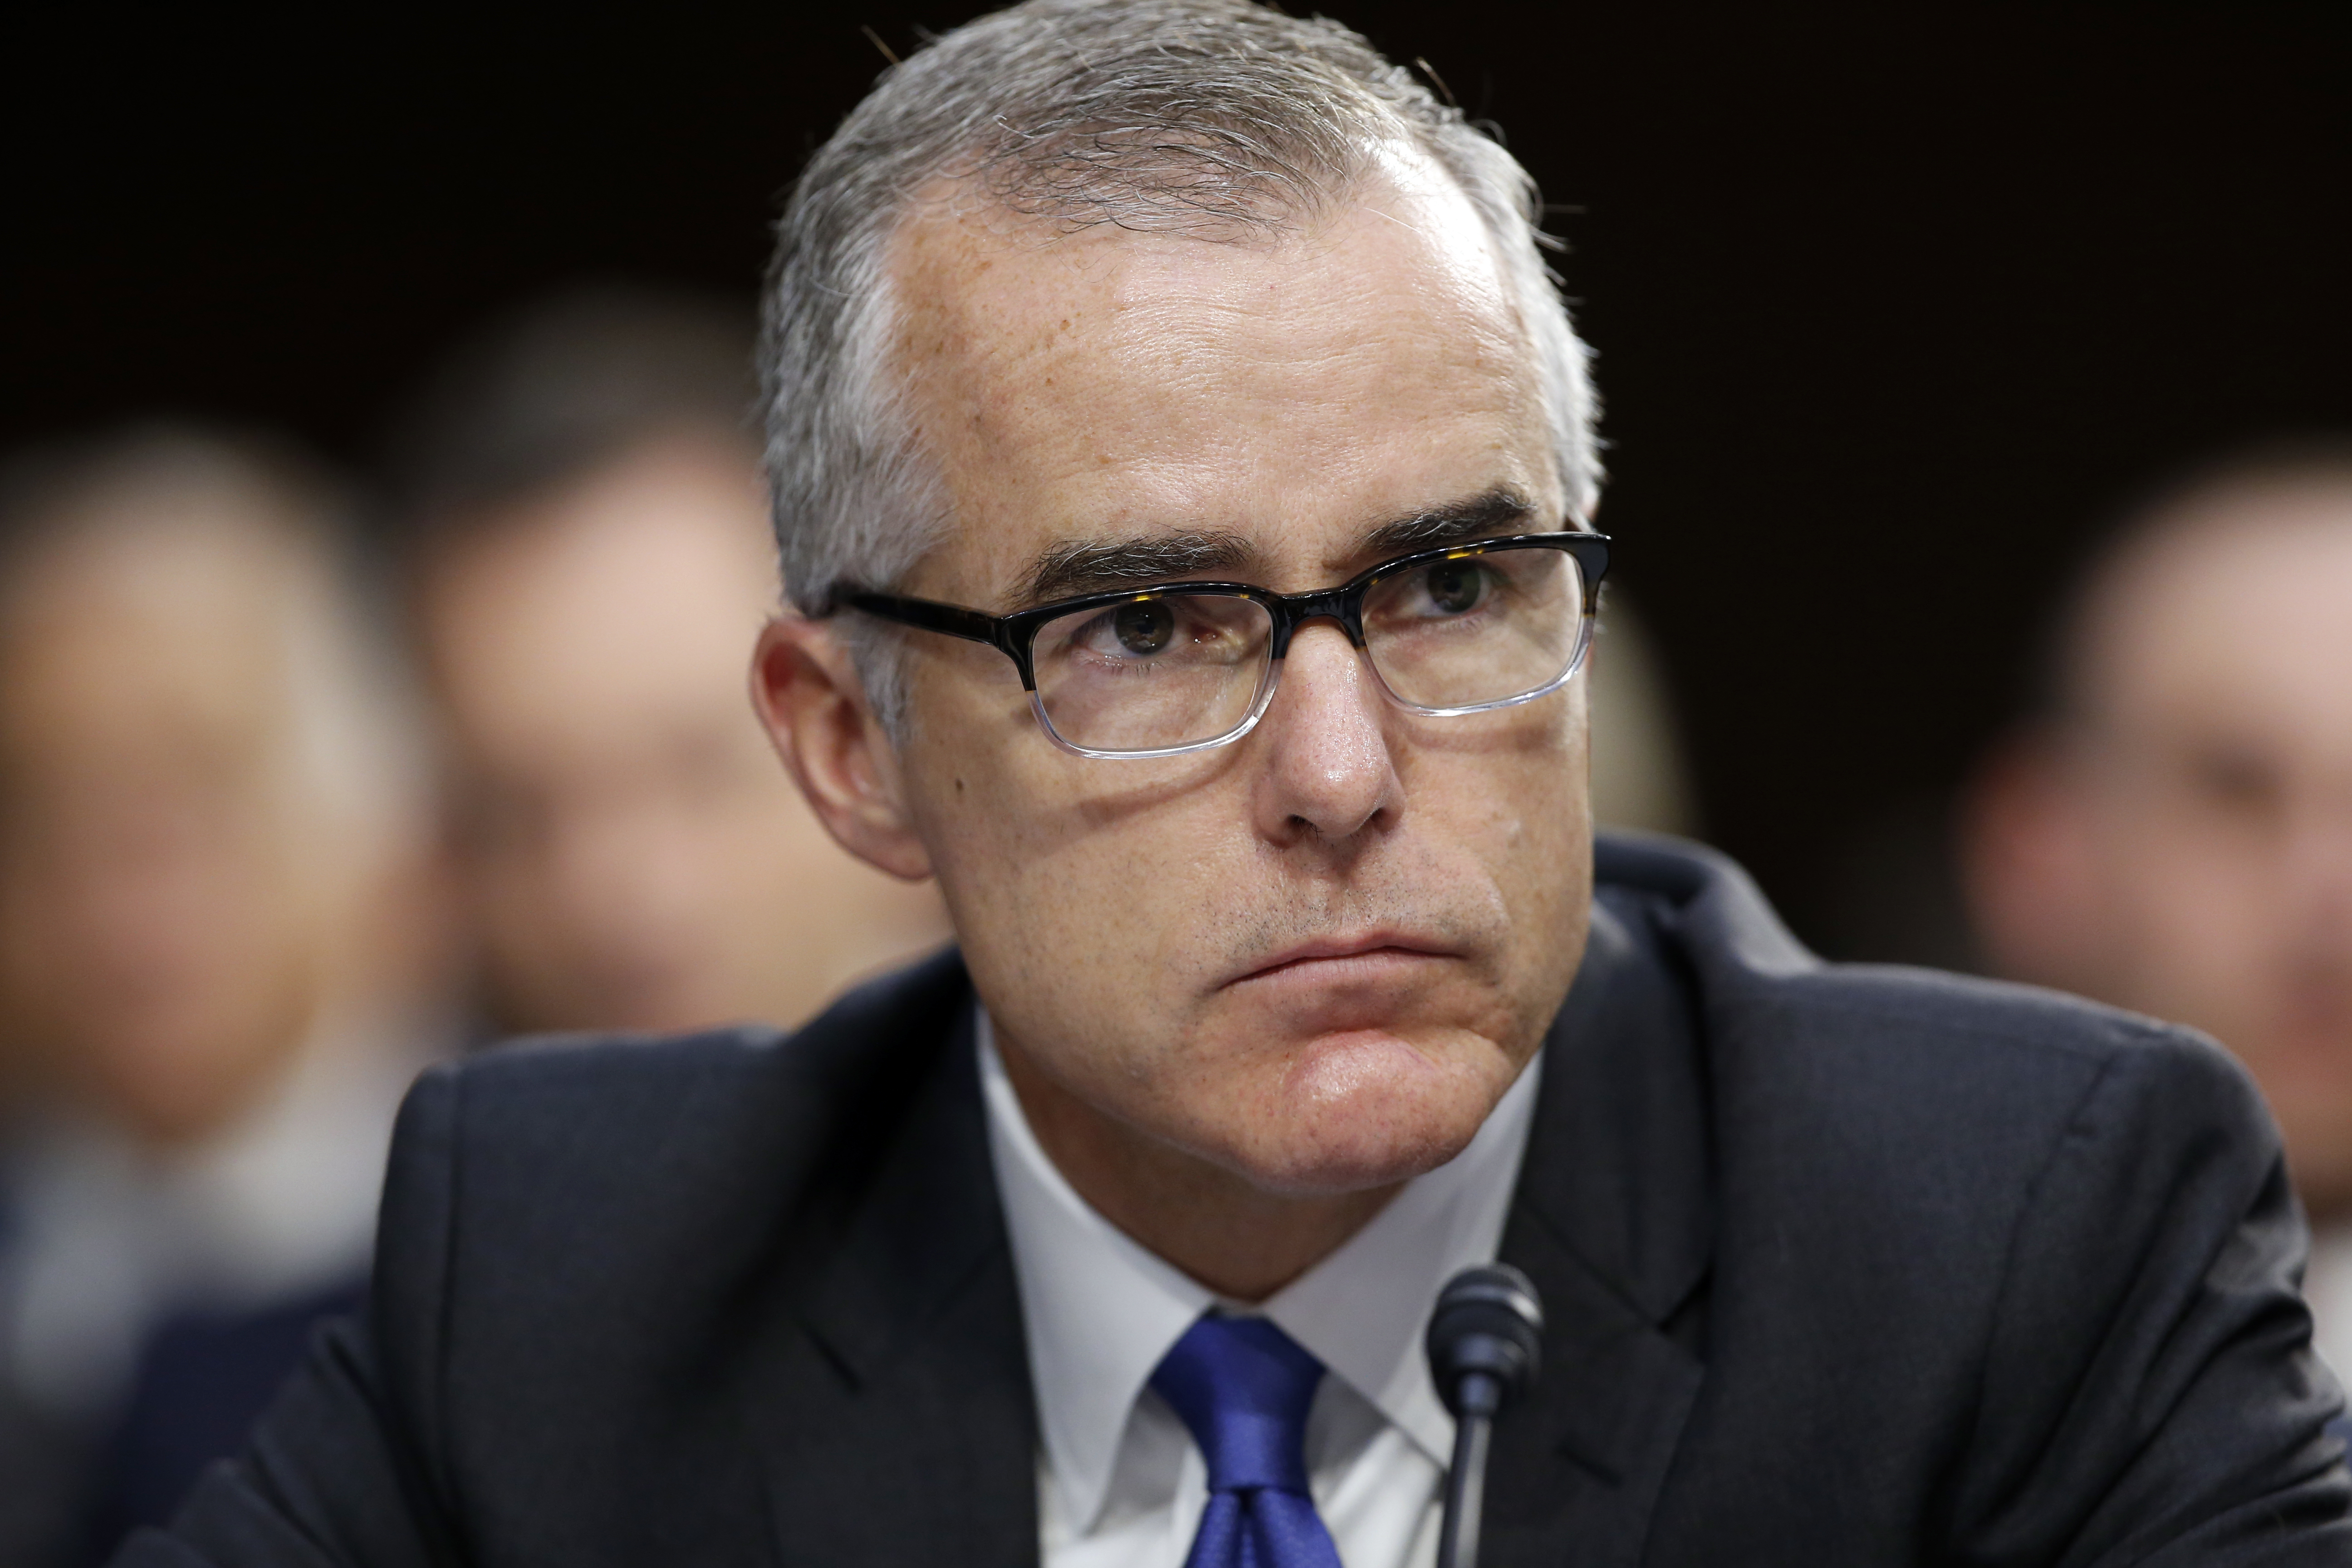 In this June 7, 2017, file photo, FBI acting director Andrew McCabe listens during a Senate Intelligence Committee hearing about the Foreign Intelligence Surveillance Act, on Capitol Hill in Washington. McCabe, the former FBI deputy director fired this year amid repeated attacks from President Donald Trump and a critical Justice Department report, has a book deal.